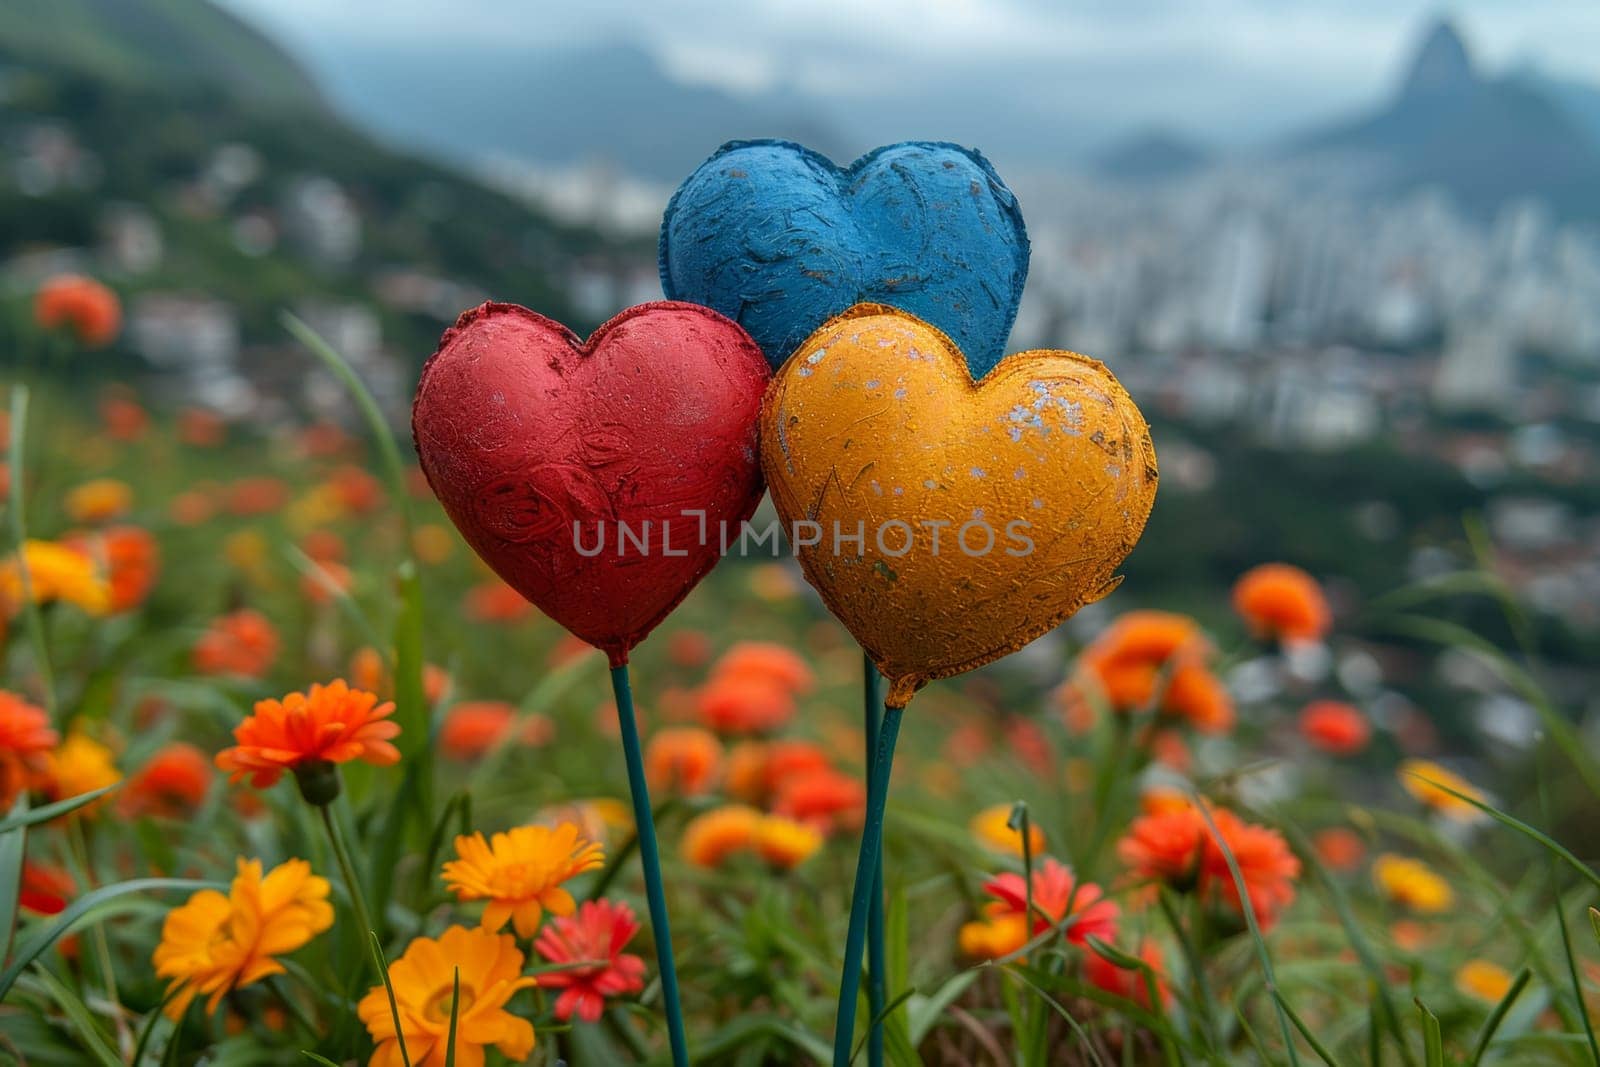 Feliz Dia Dos Namorados - Happy Valentine's Day in Brazilian Portuguese. Red loving hearts dedicated to the holiday in Brazil on June 12th by Lobachad